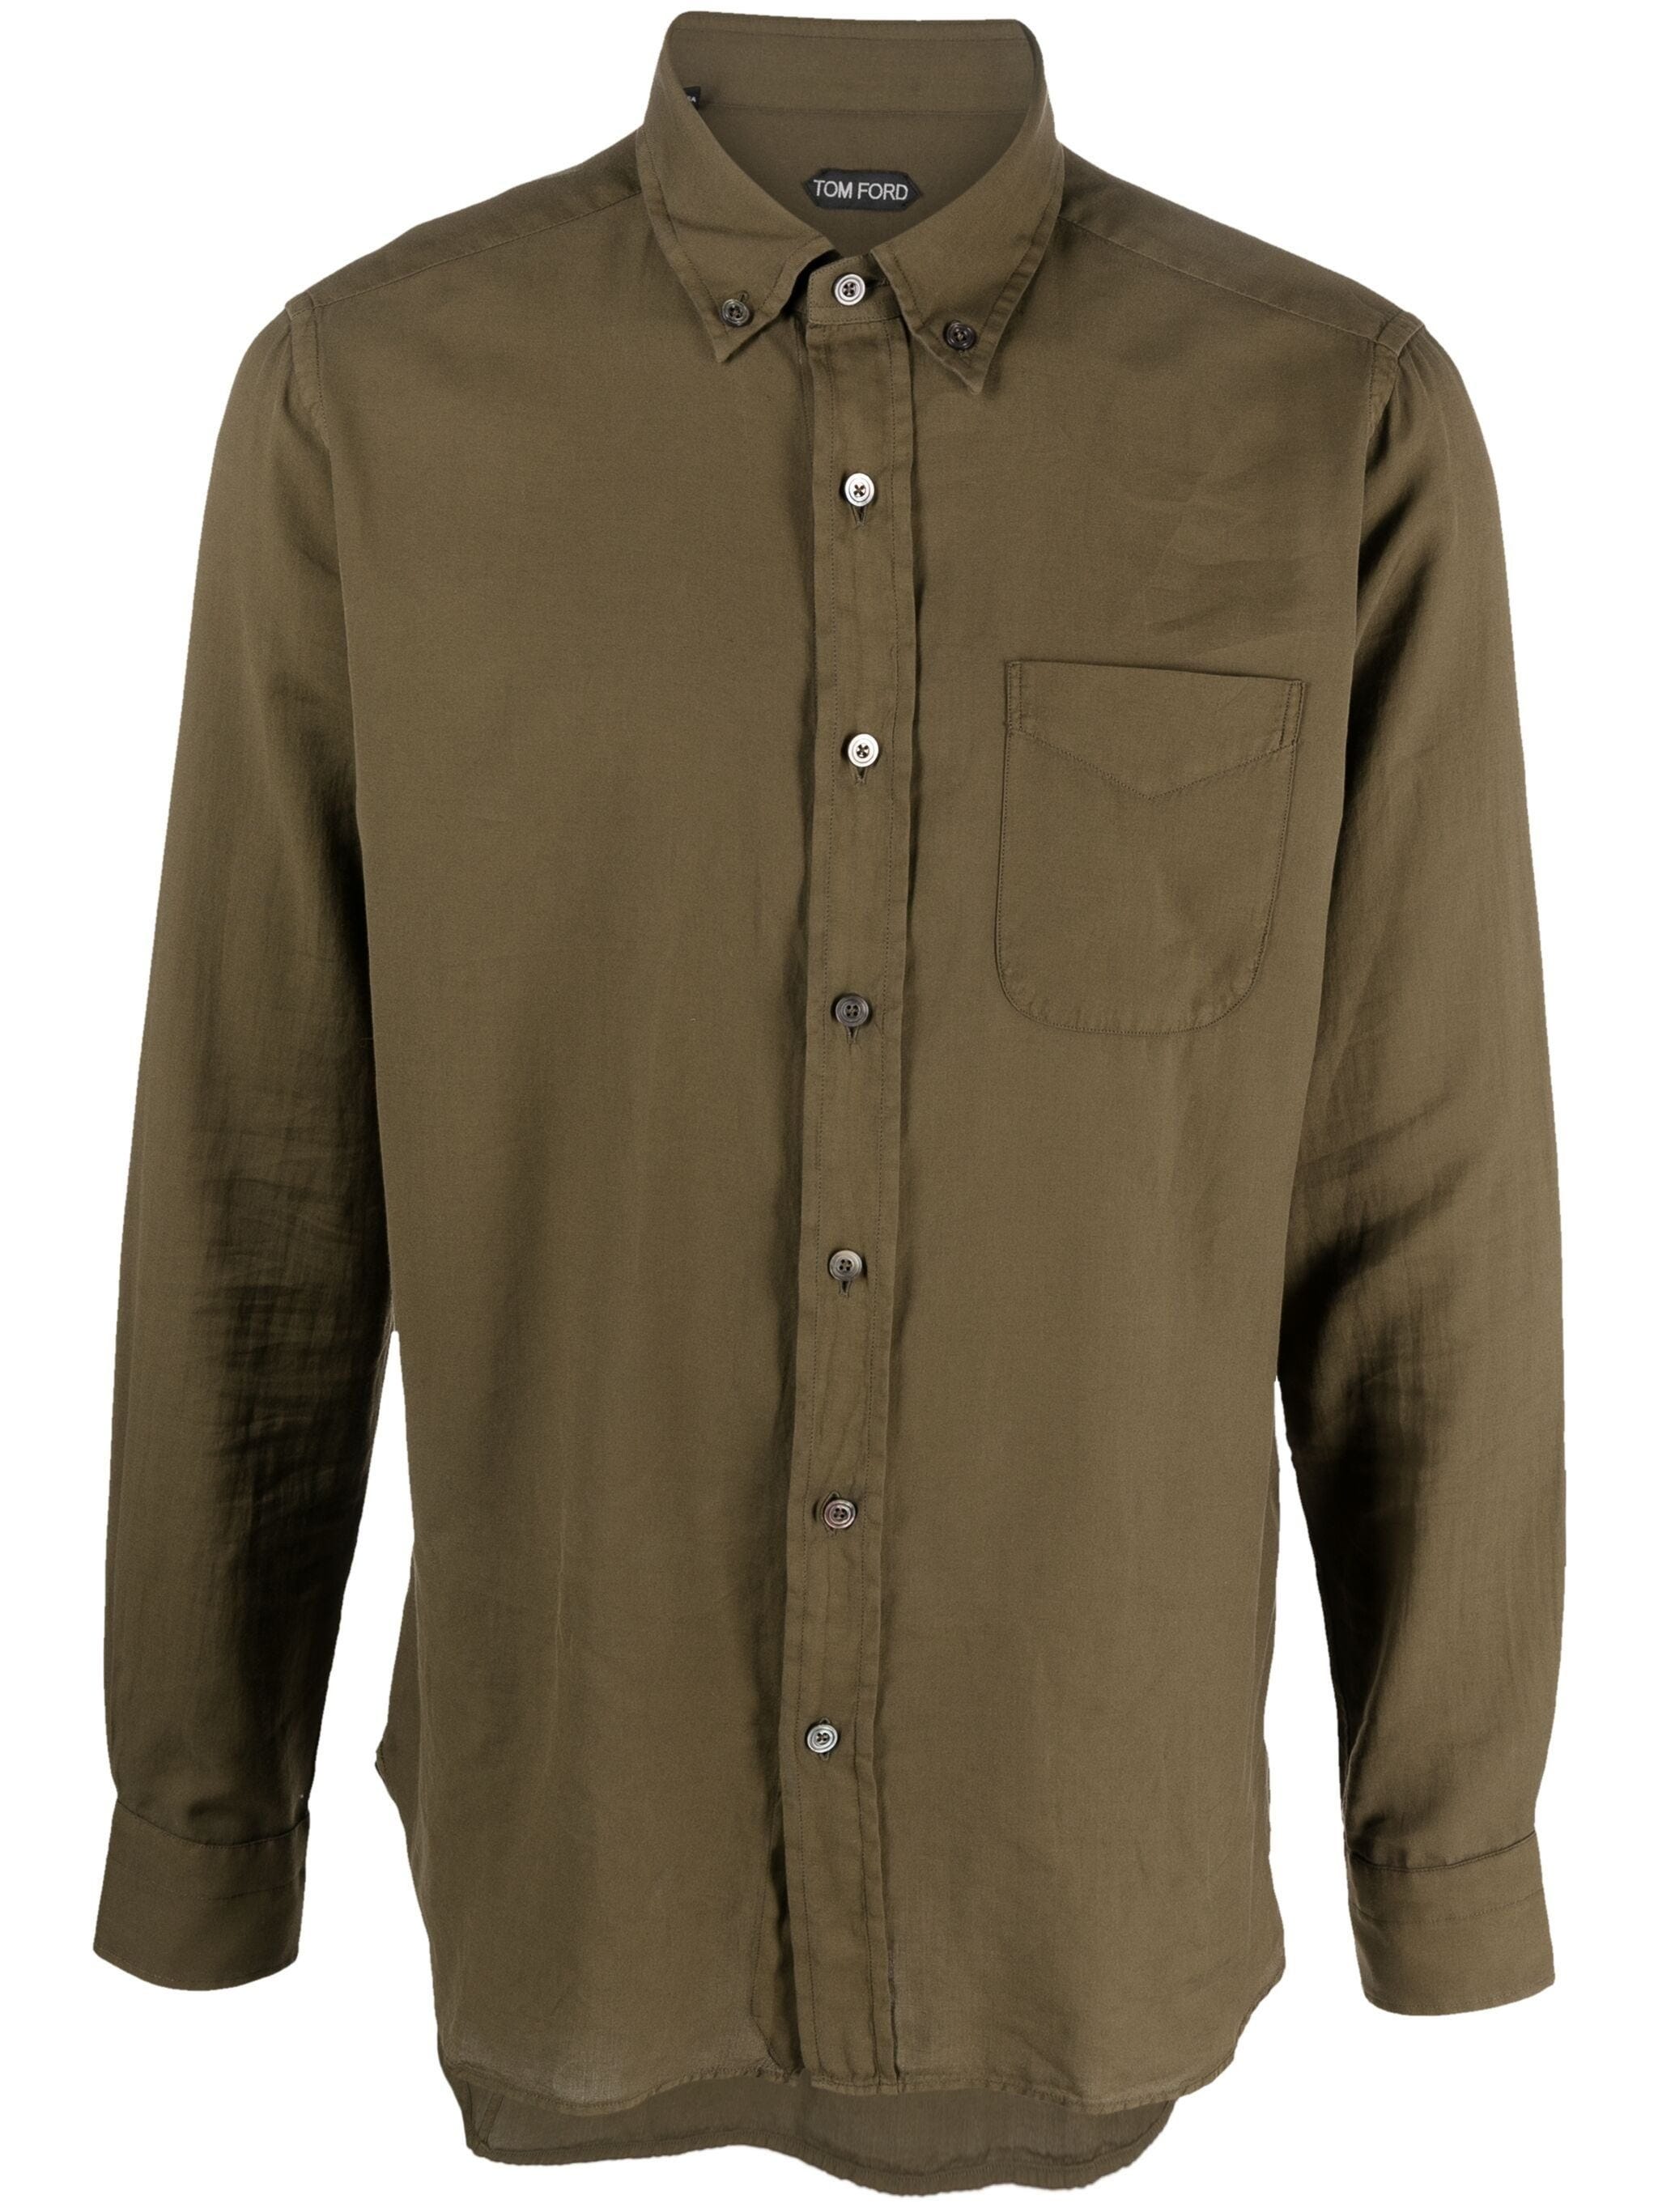 TOM FORD LONG-SLEEVE BUTTONED SHIRT